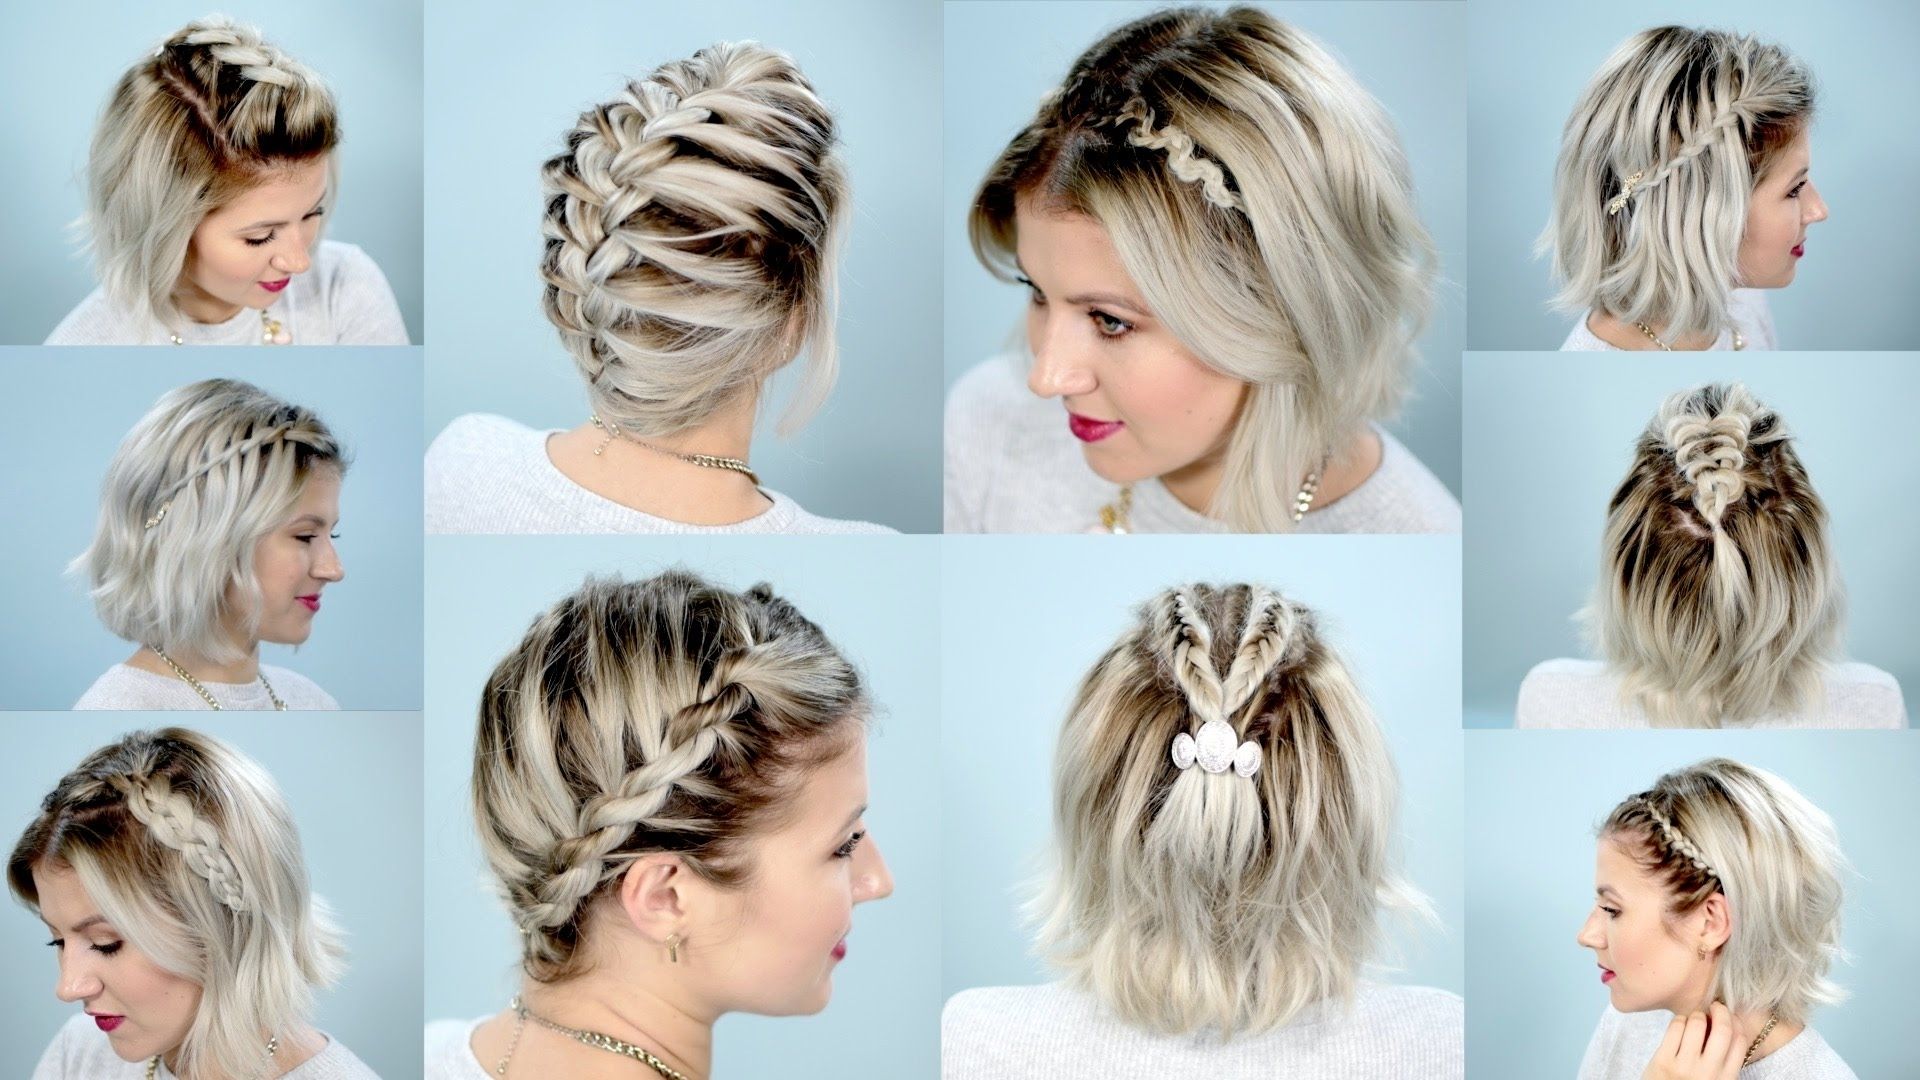 10 Easy Braids For Short Hair Tutorial (View 1 of 15)